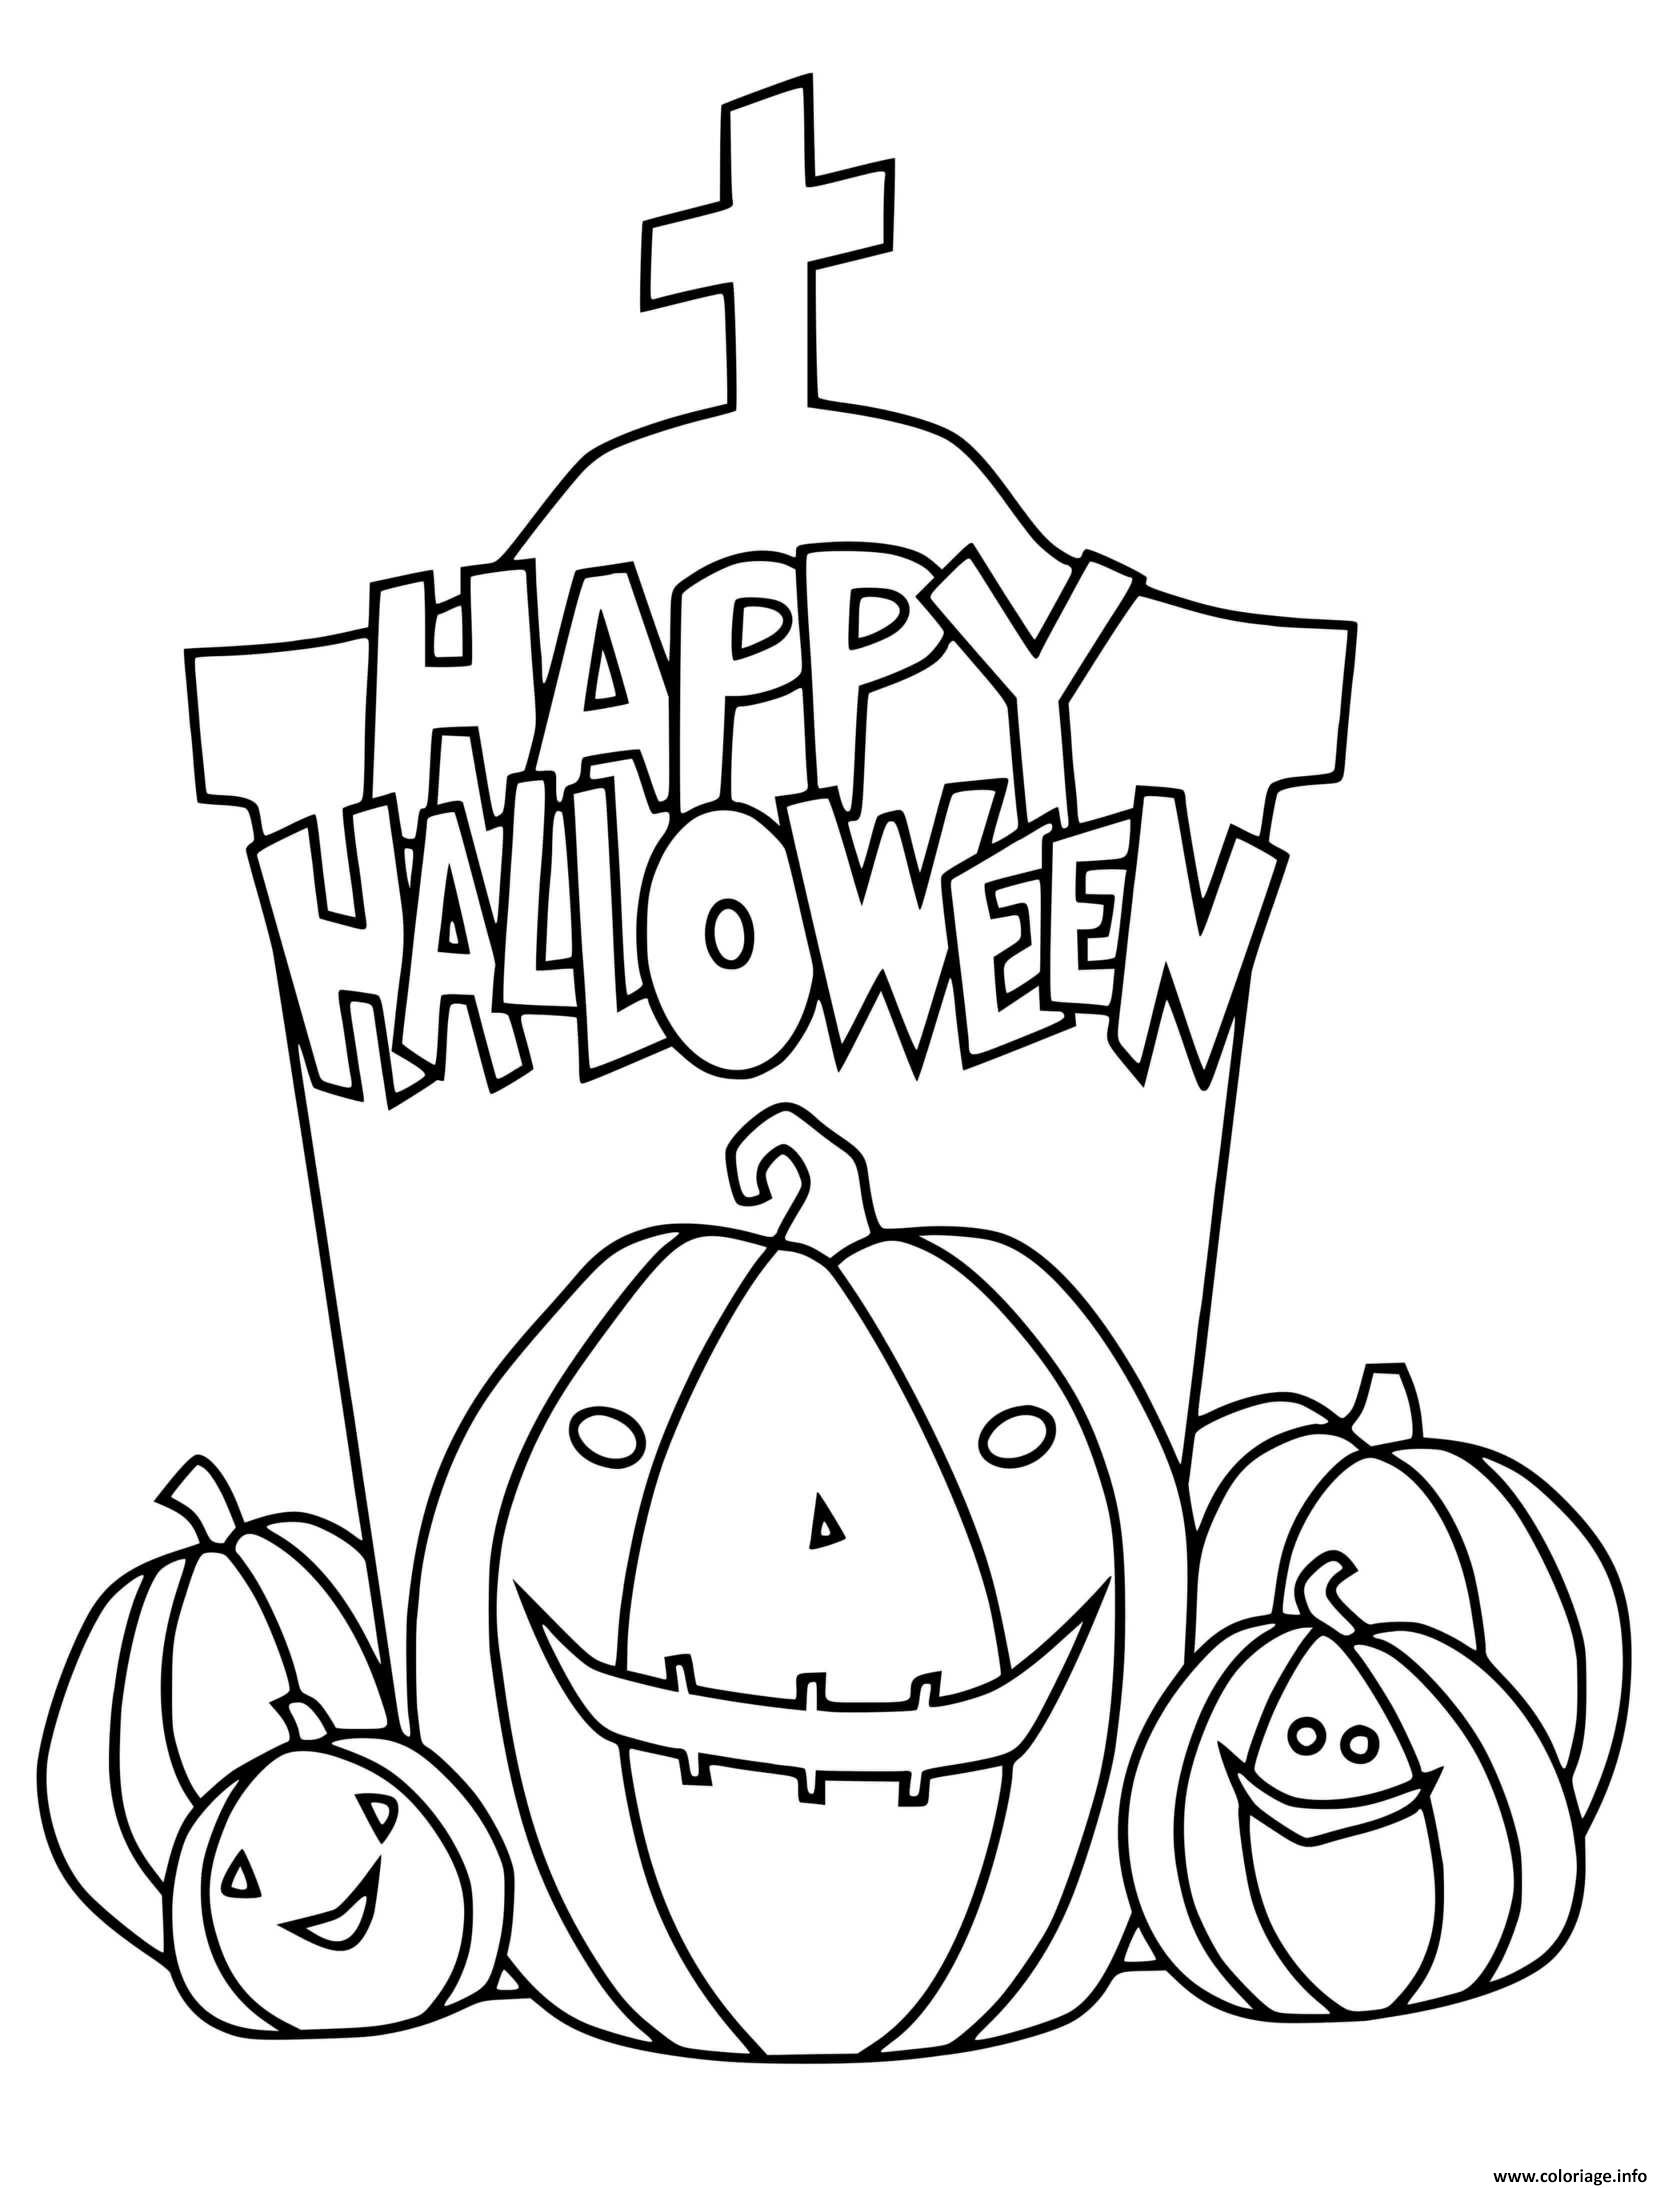 15 Coloriage Gacha Club Coloriage Citrouille Halloween | Images and ...